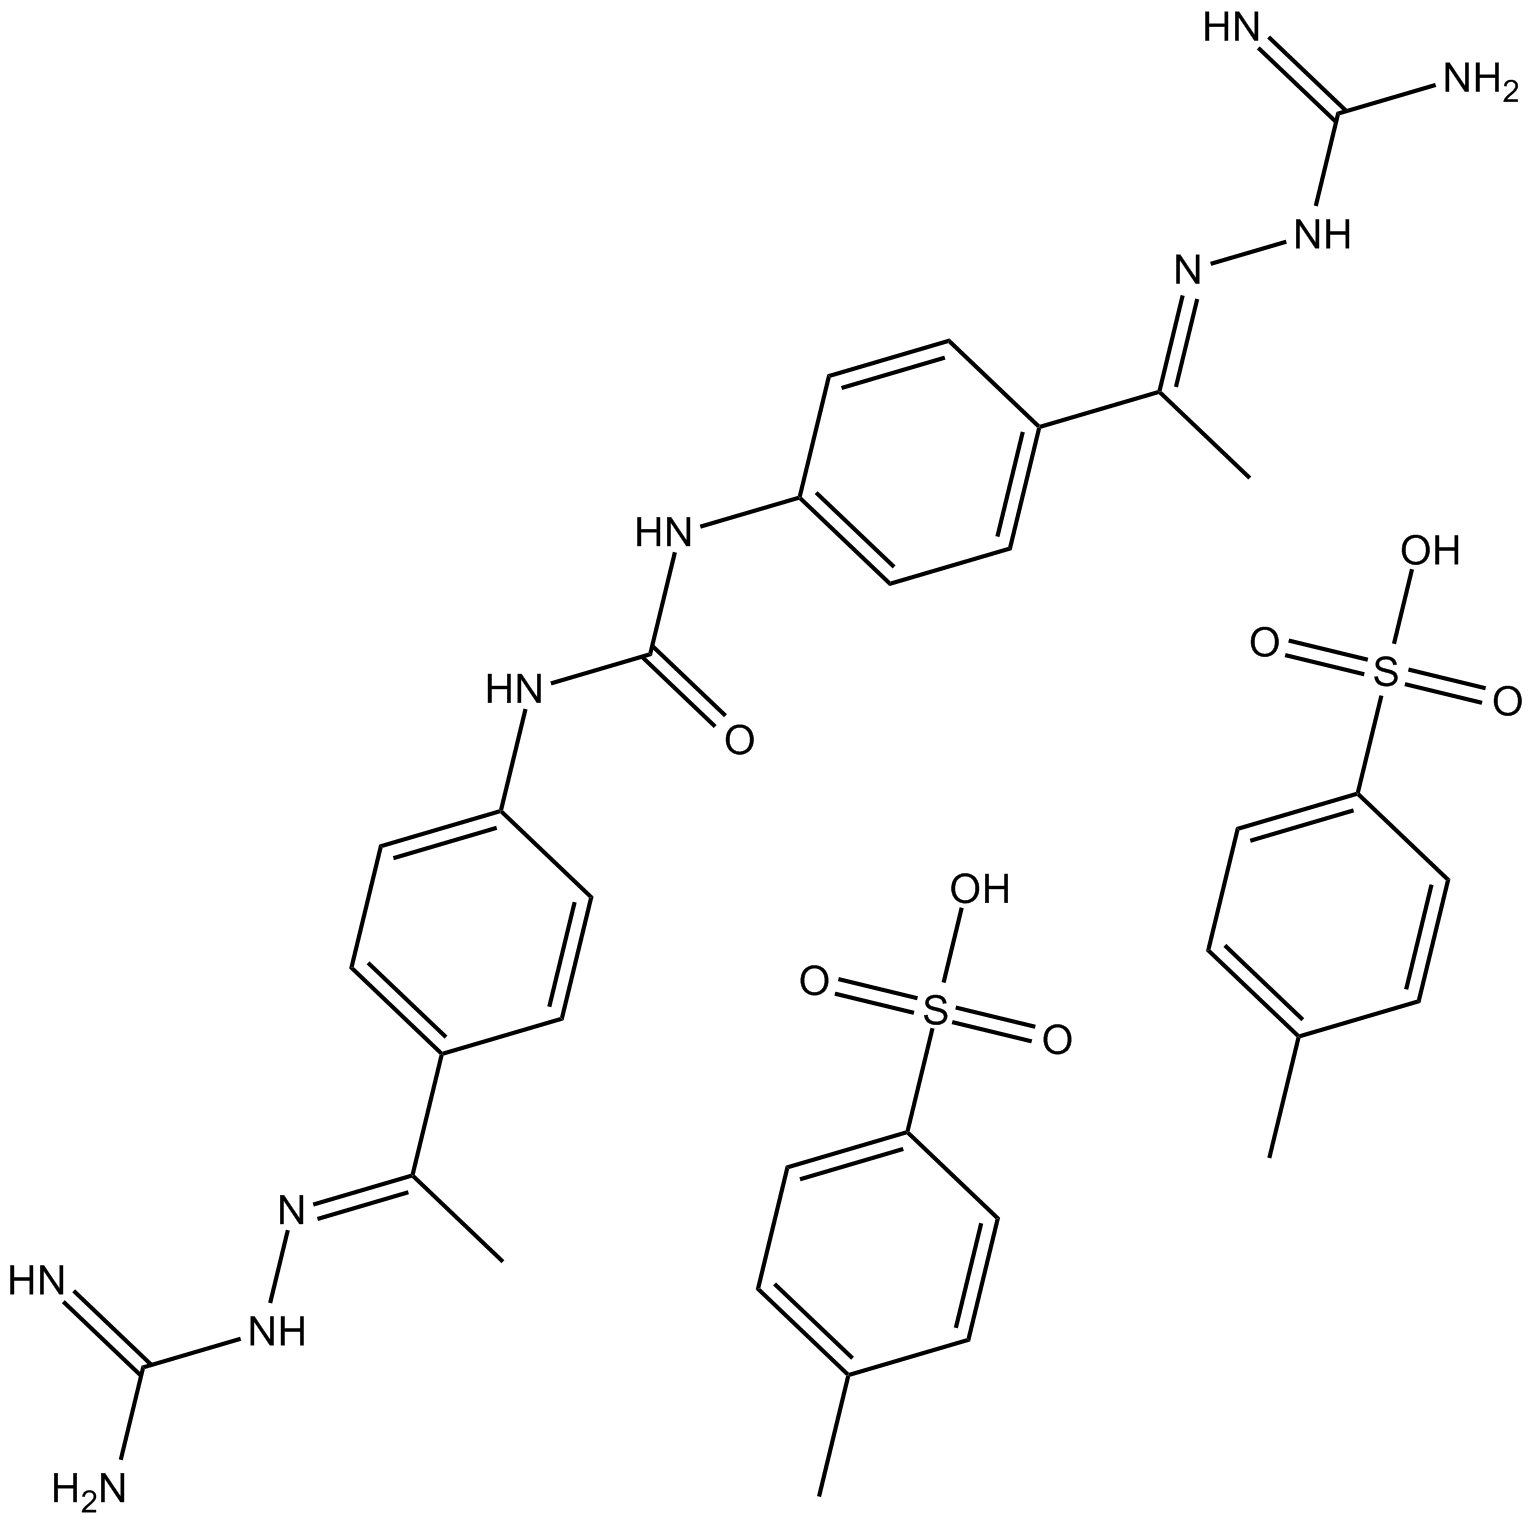 NSC 109555 ditosylate  Chemical Structure